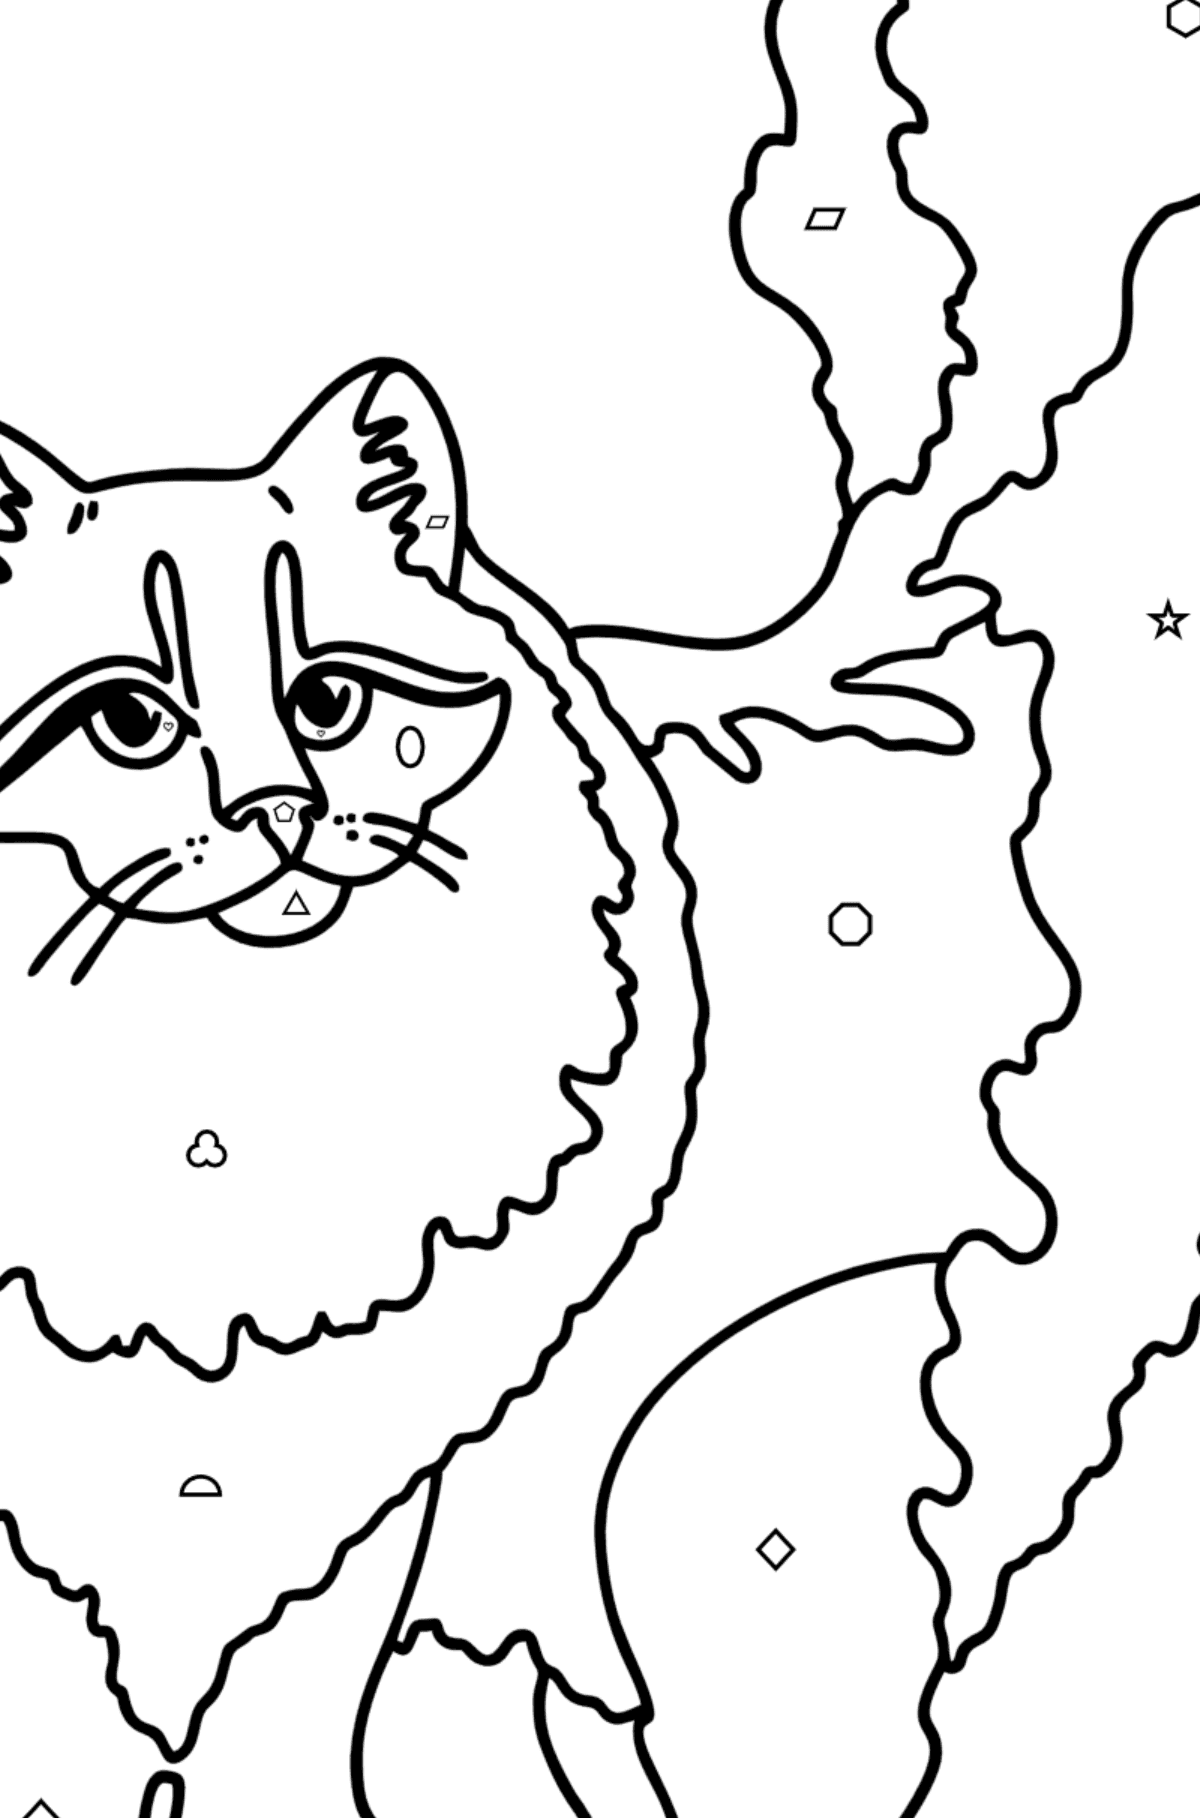 Siberian Cat coloring page - Coloring by Geometric Shapes for Kids